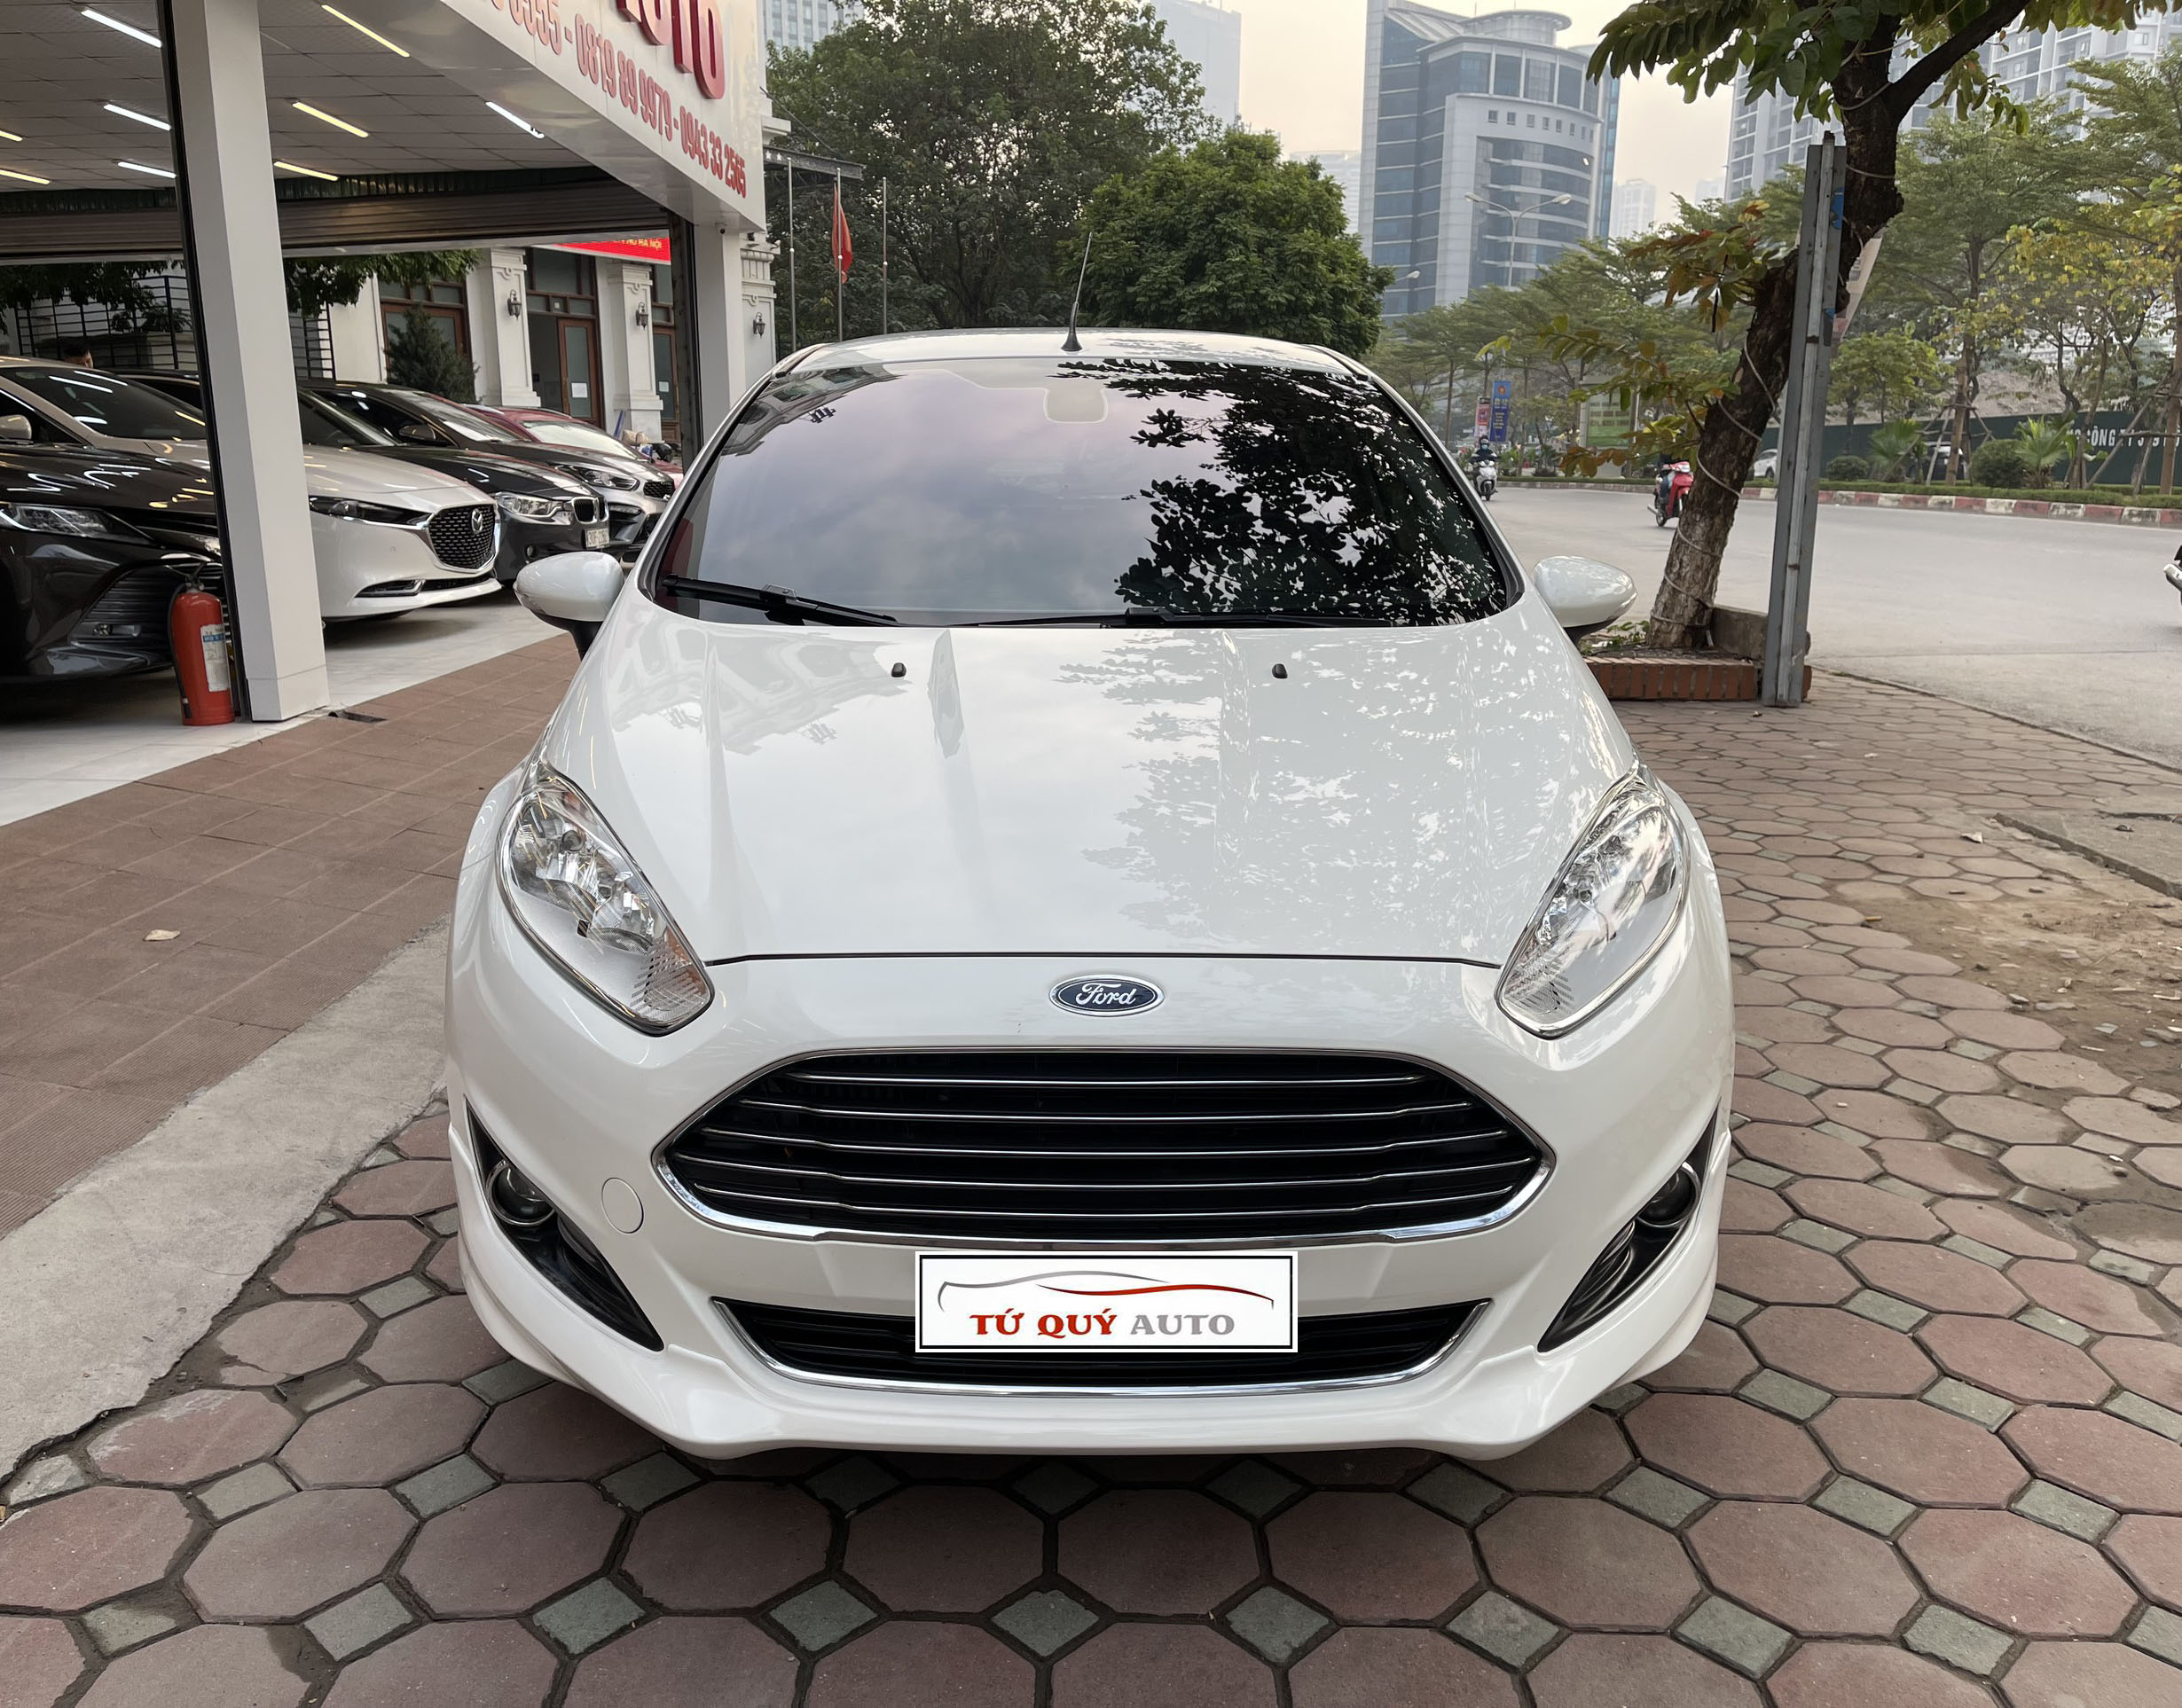 Ford Fiesta 10T Titanium Automatic 2018 Review